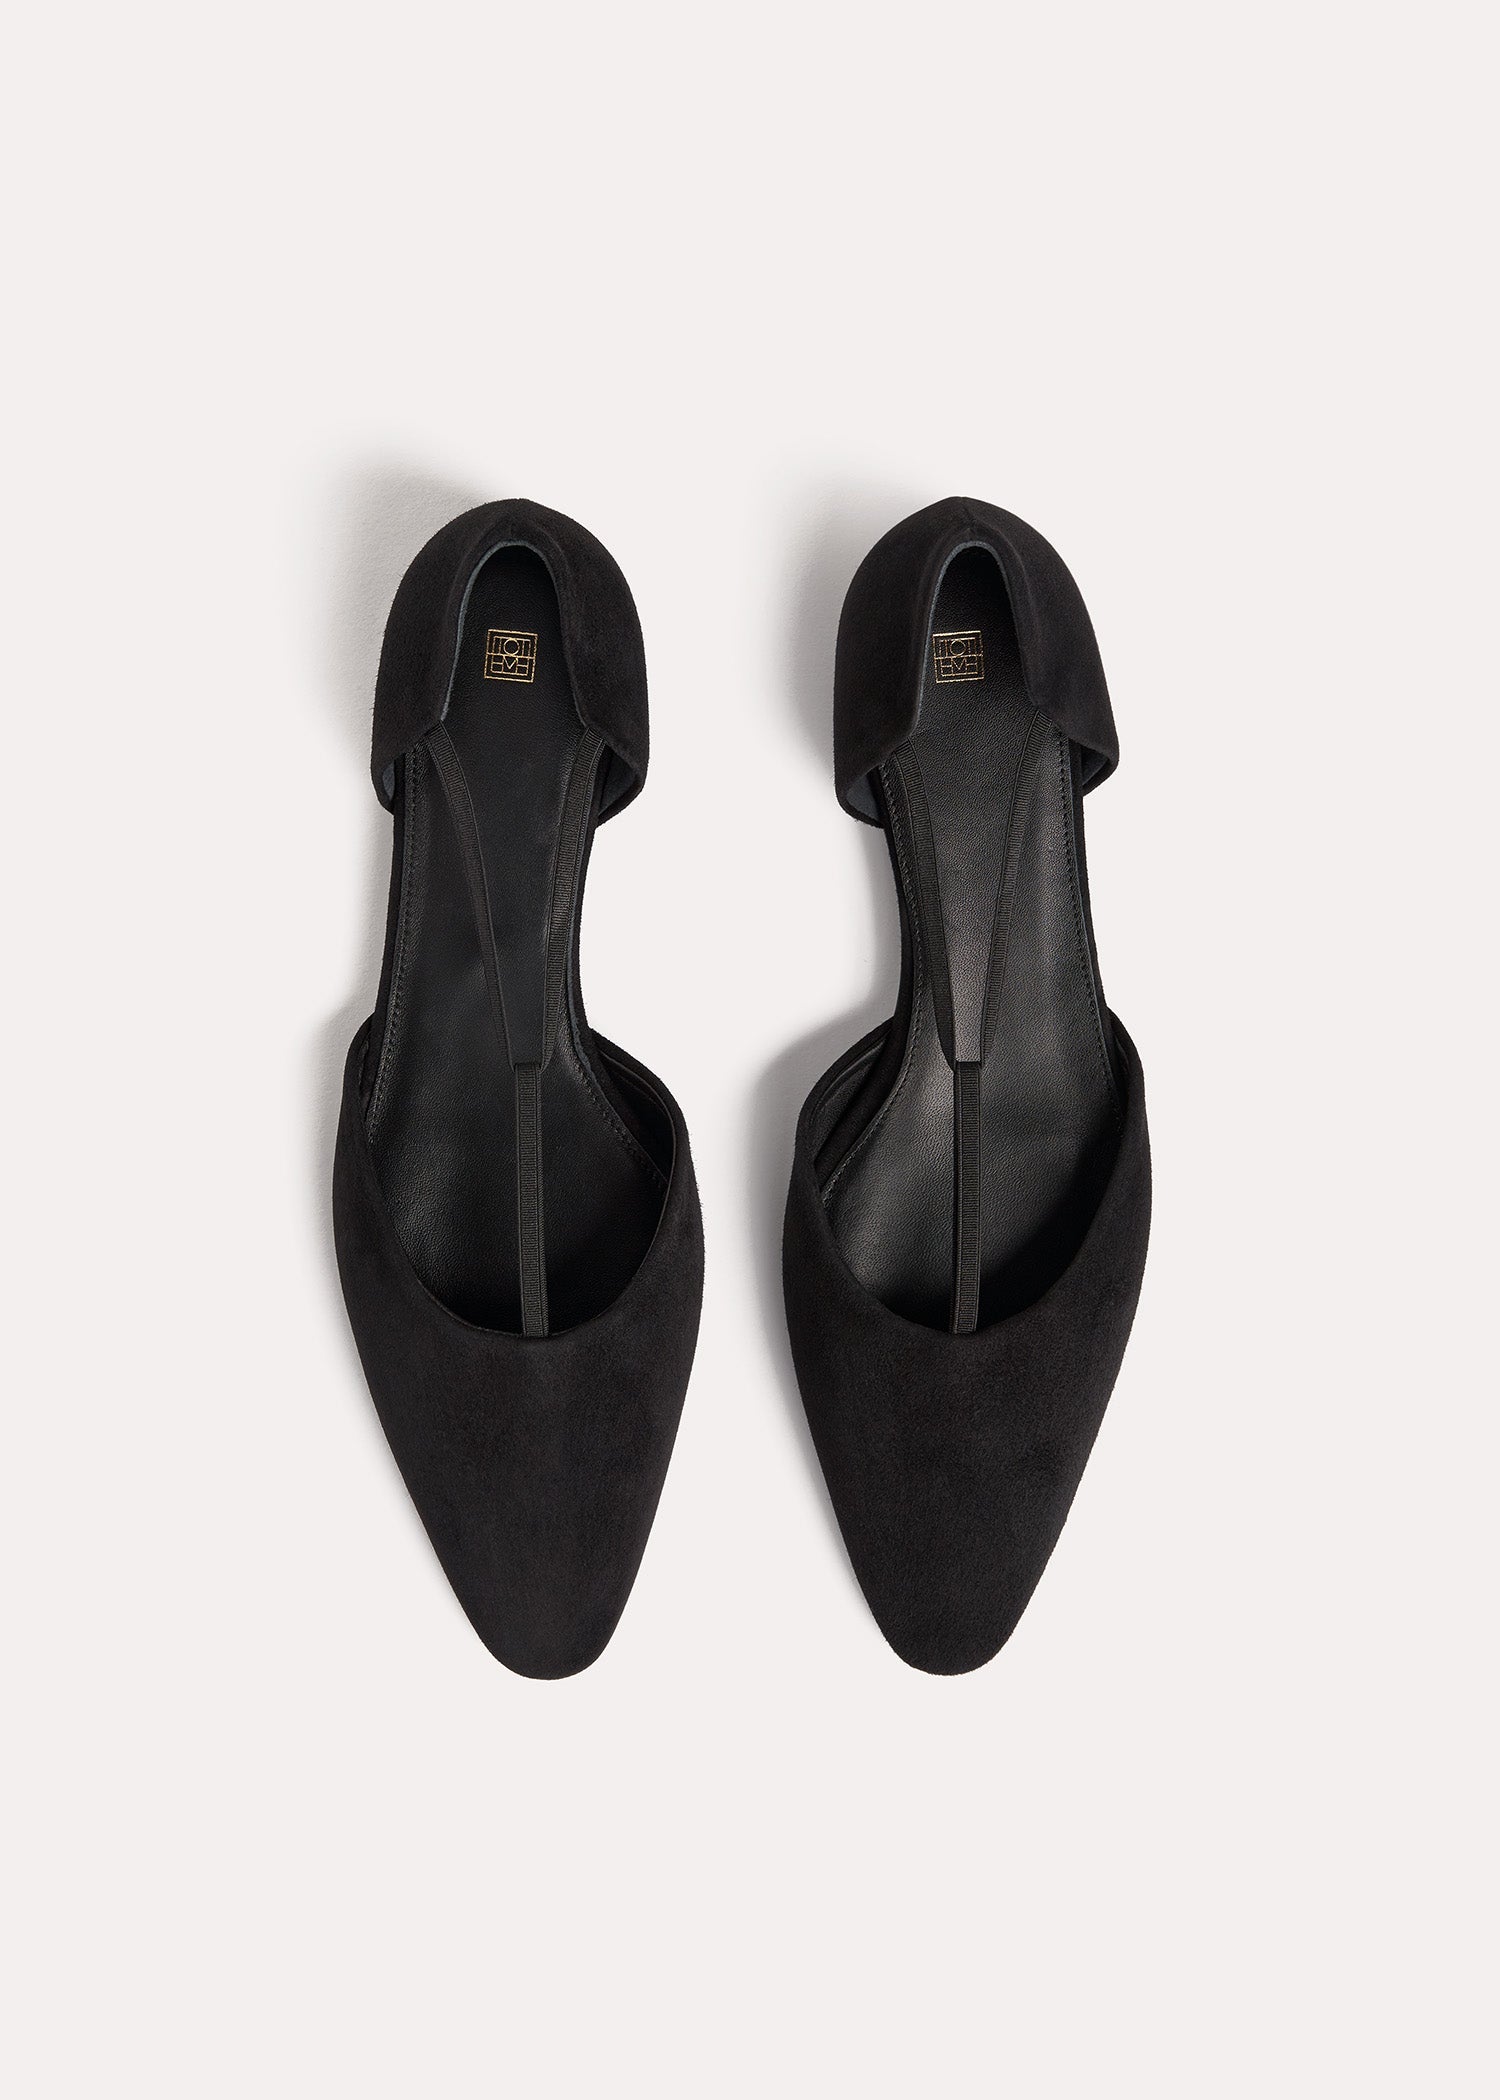 The Suede T-Strap Flat black